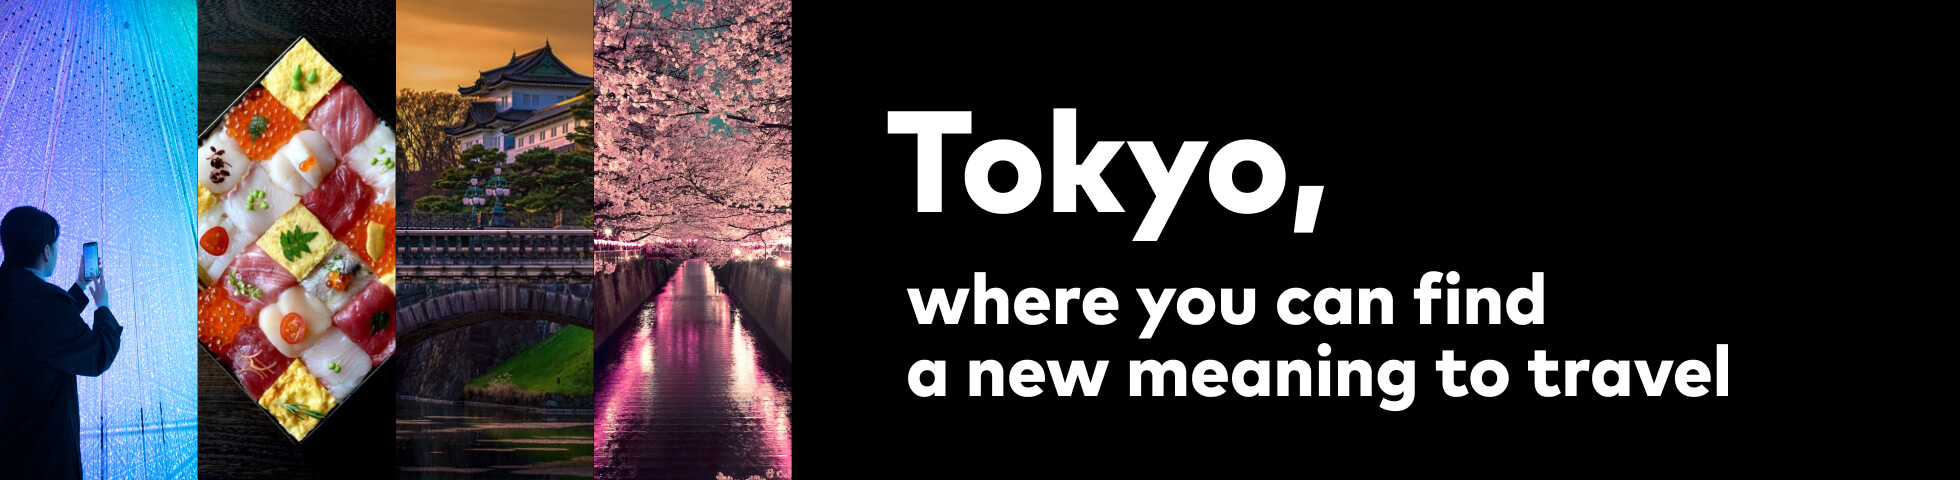 Tokyo, where you can find a new meaning to travel